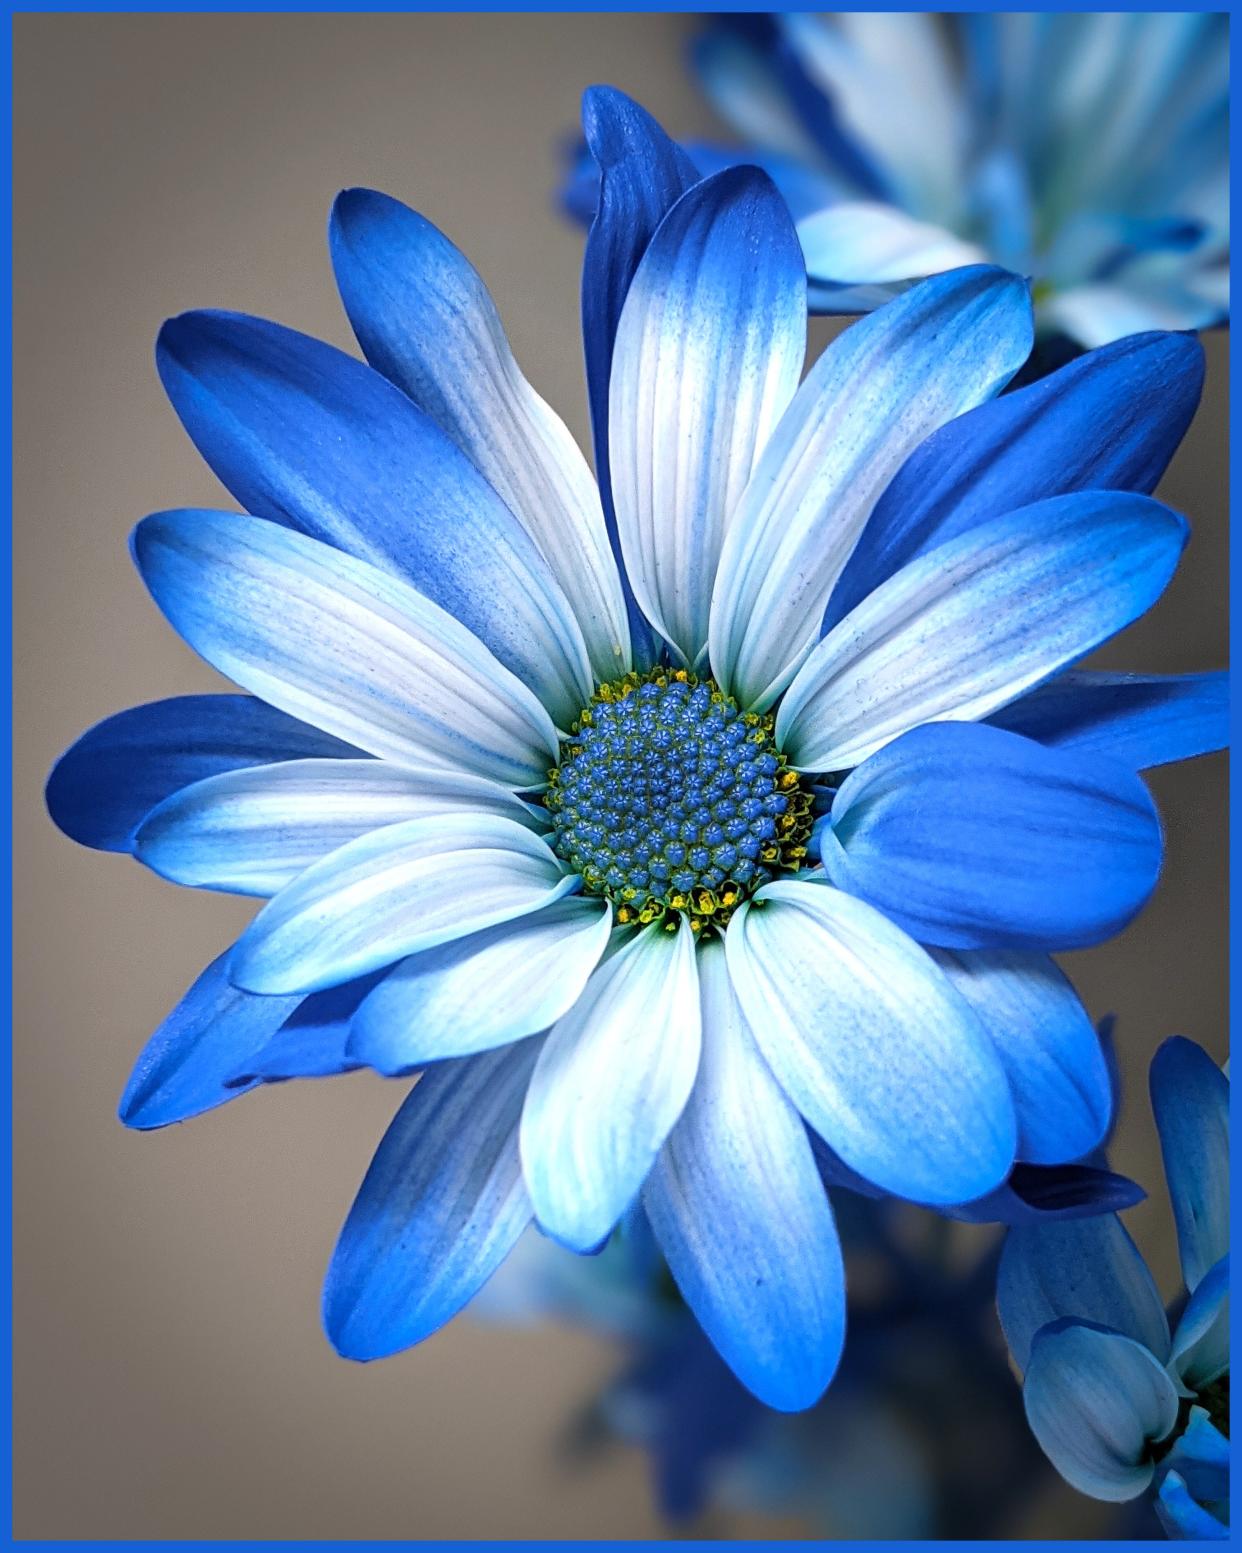 “Blue Flower," a photograph by Michelle Wittensoldner, was awarded best of show in the 2022 annual photography contest and exhibition sponsored by Focus Point.